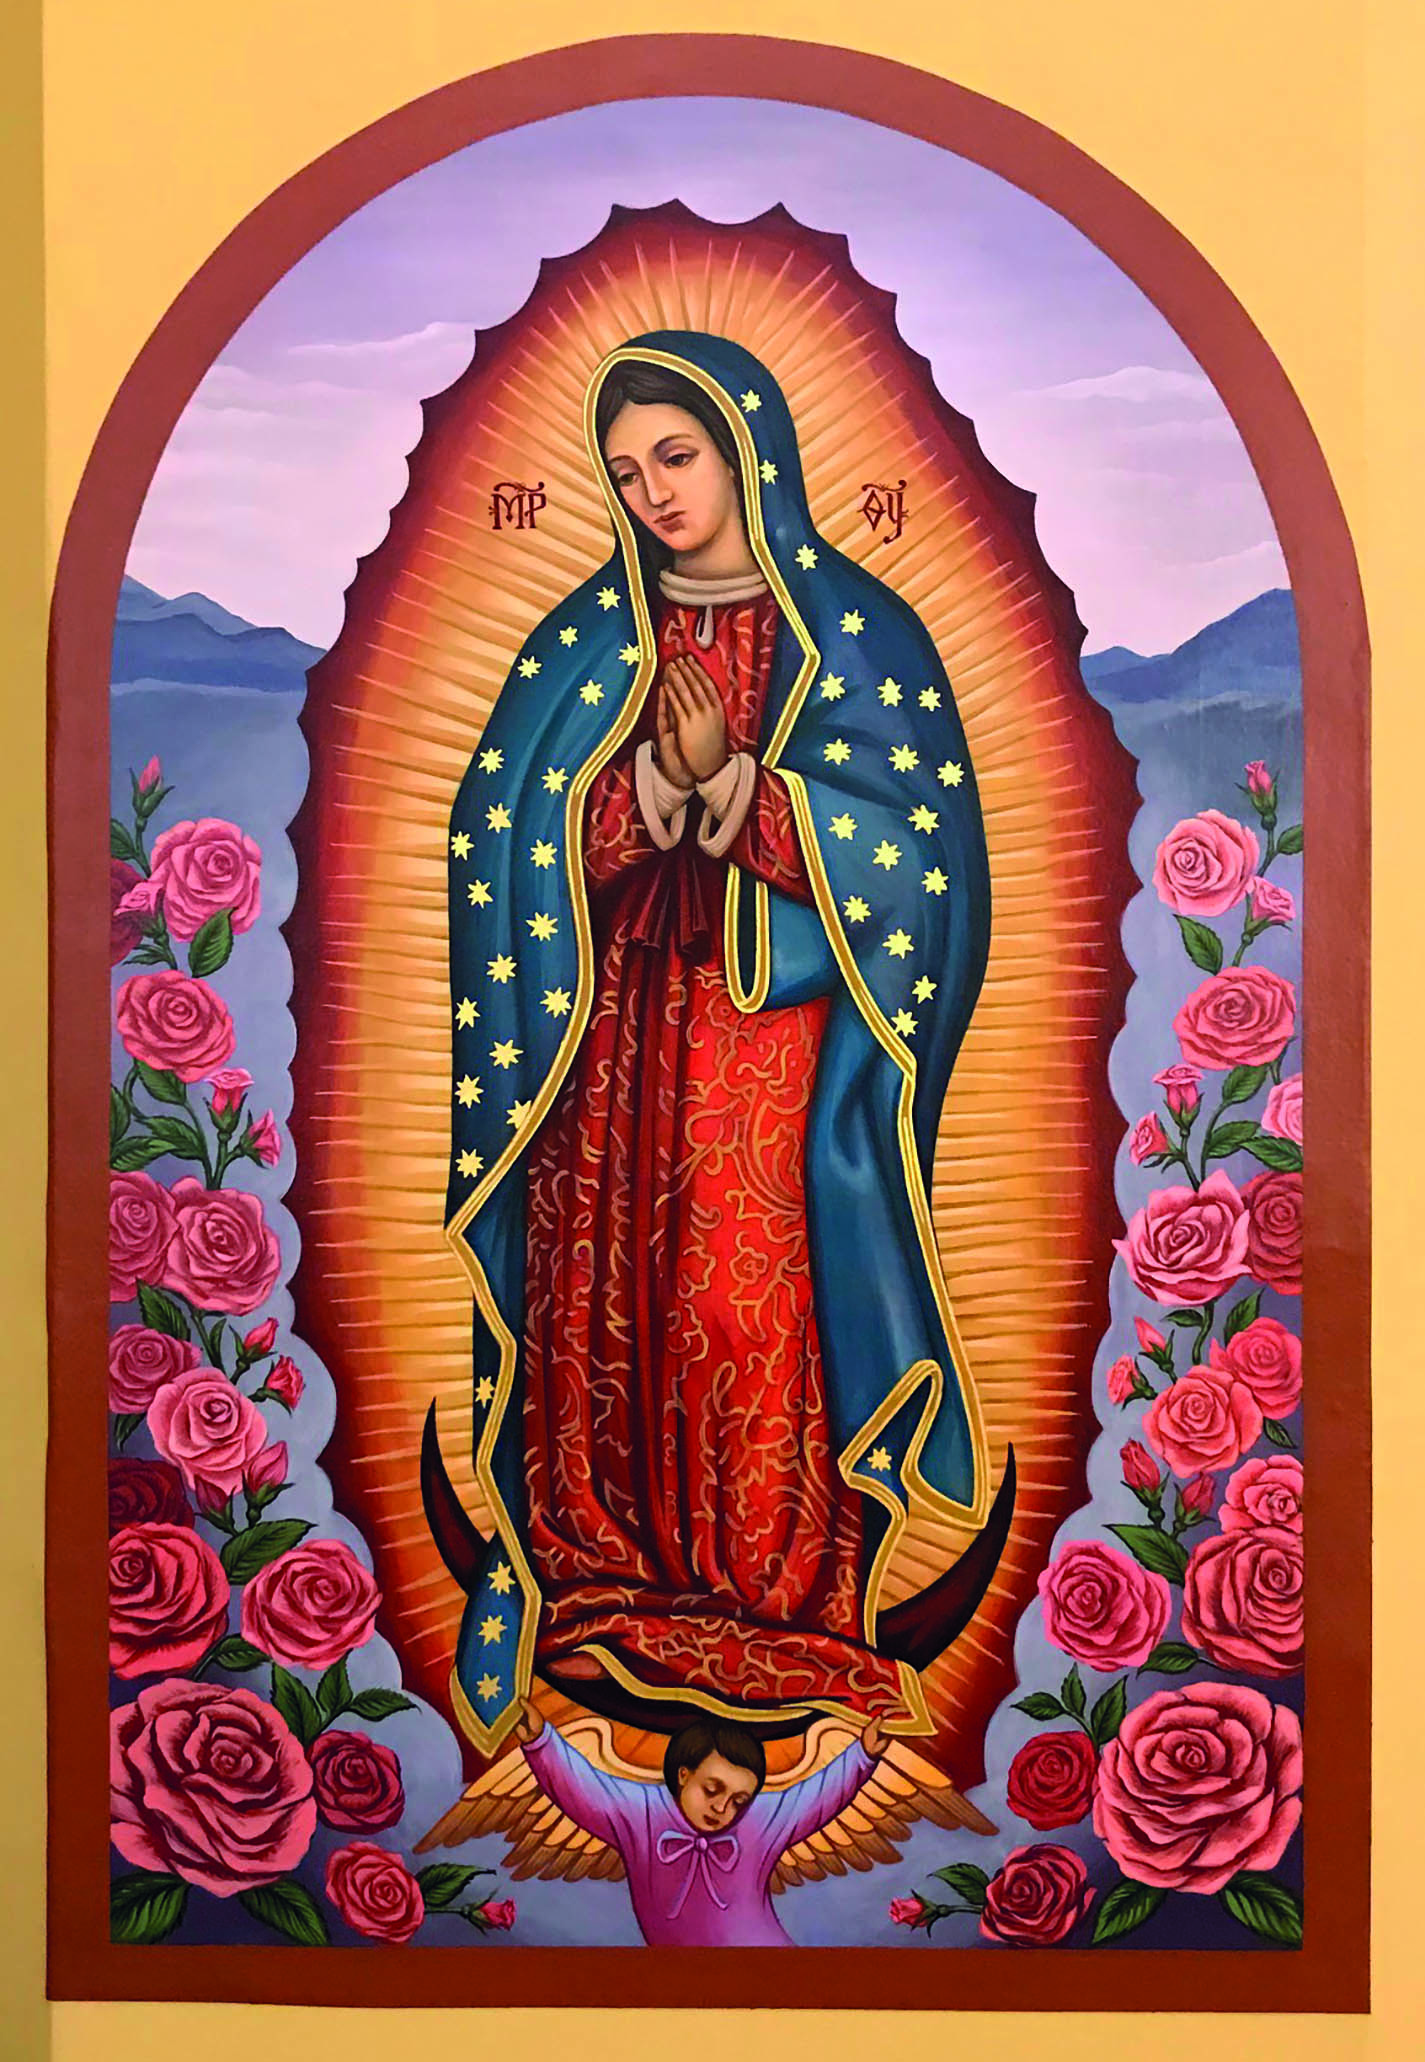 Our Lady of Guadalupe is a feast for Byzantine Catholics, too The